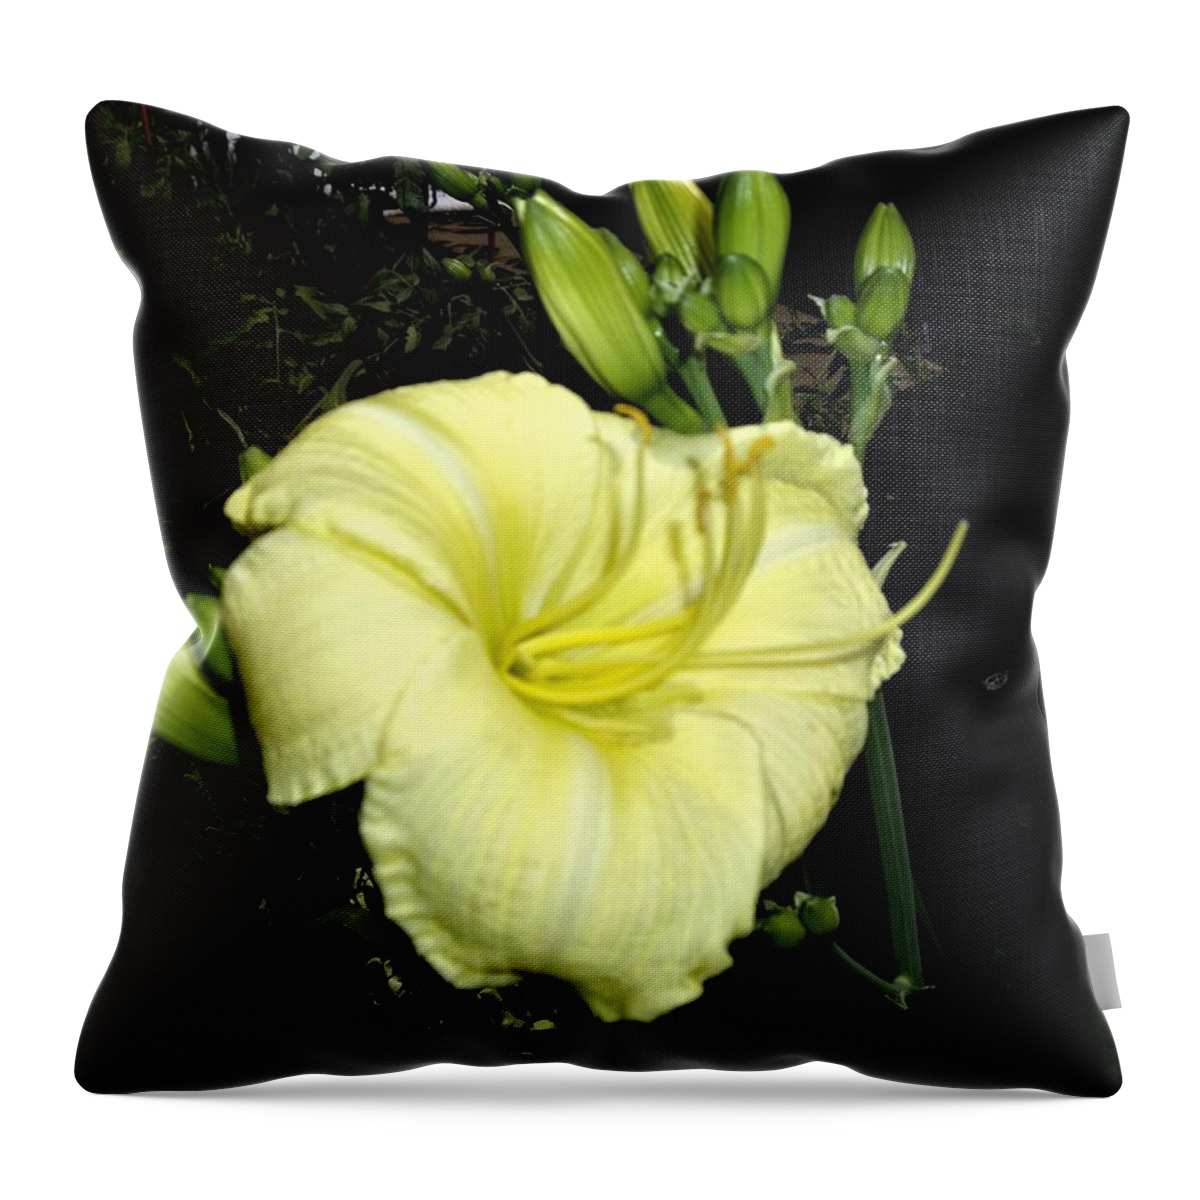 Lily Throw Pillow featuring the photograph Yellow Lily by Nancy Ayanna Wyatt